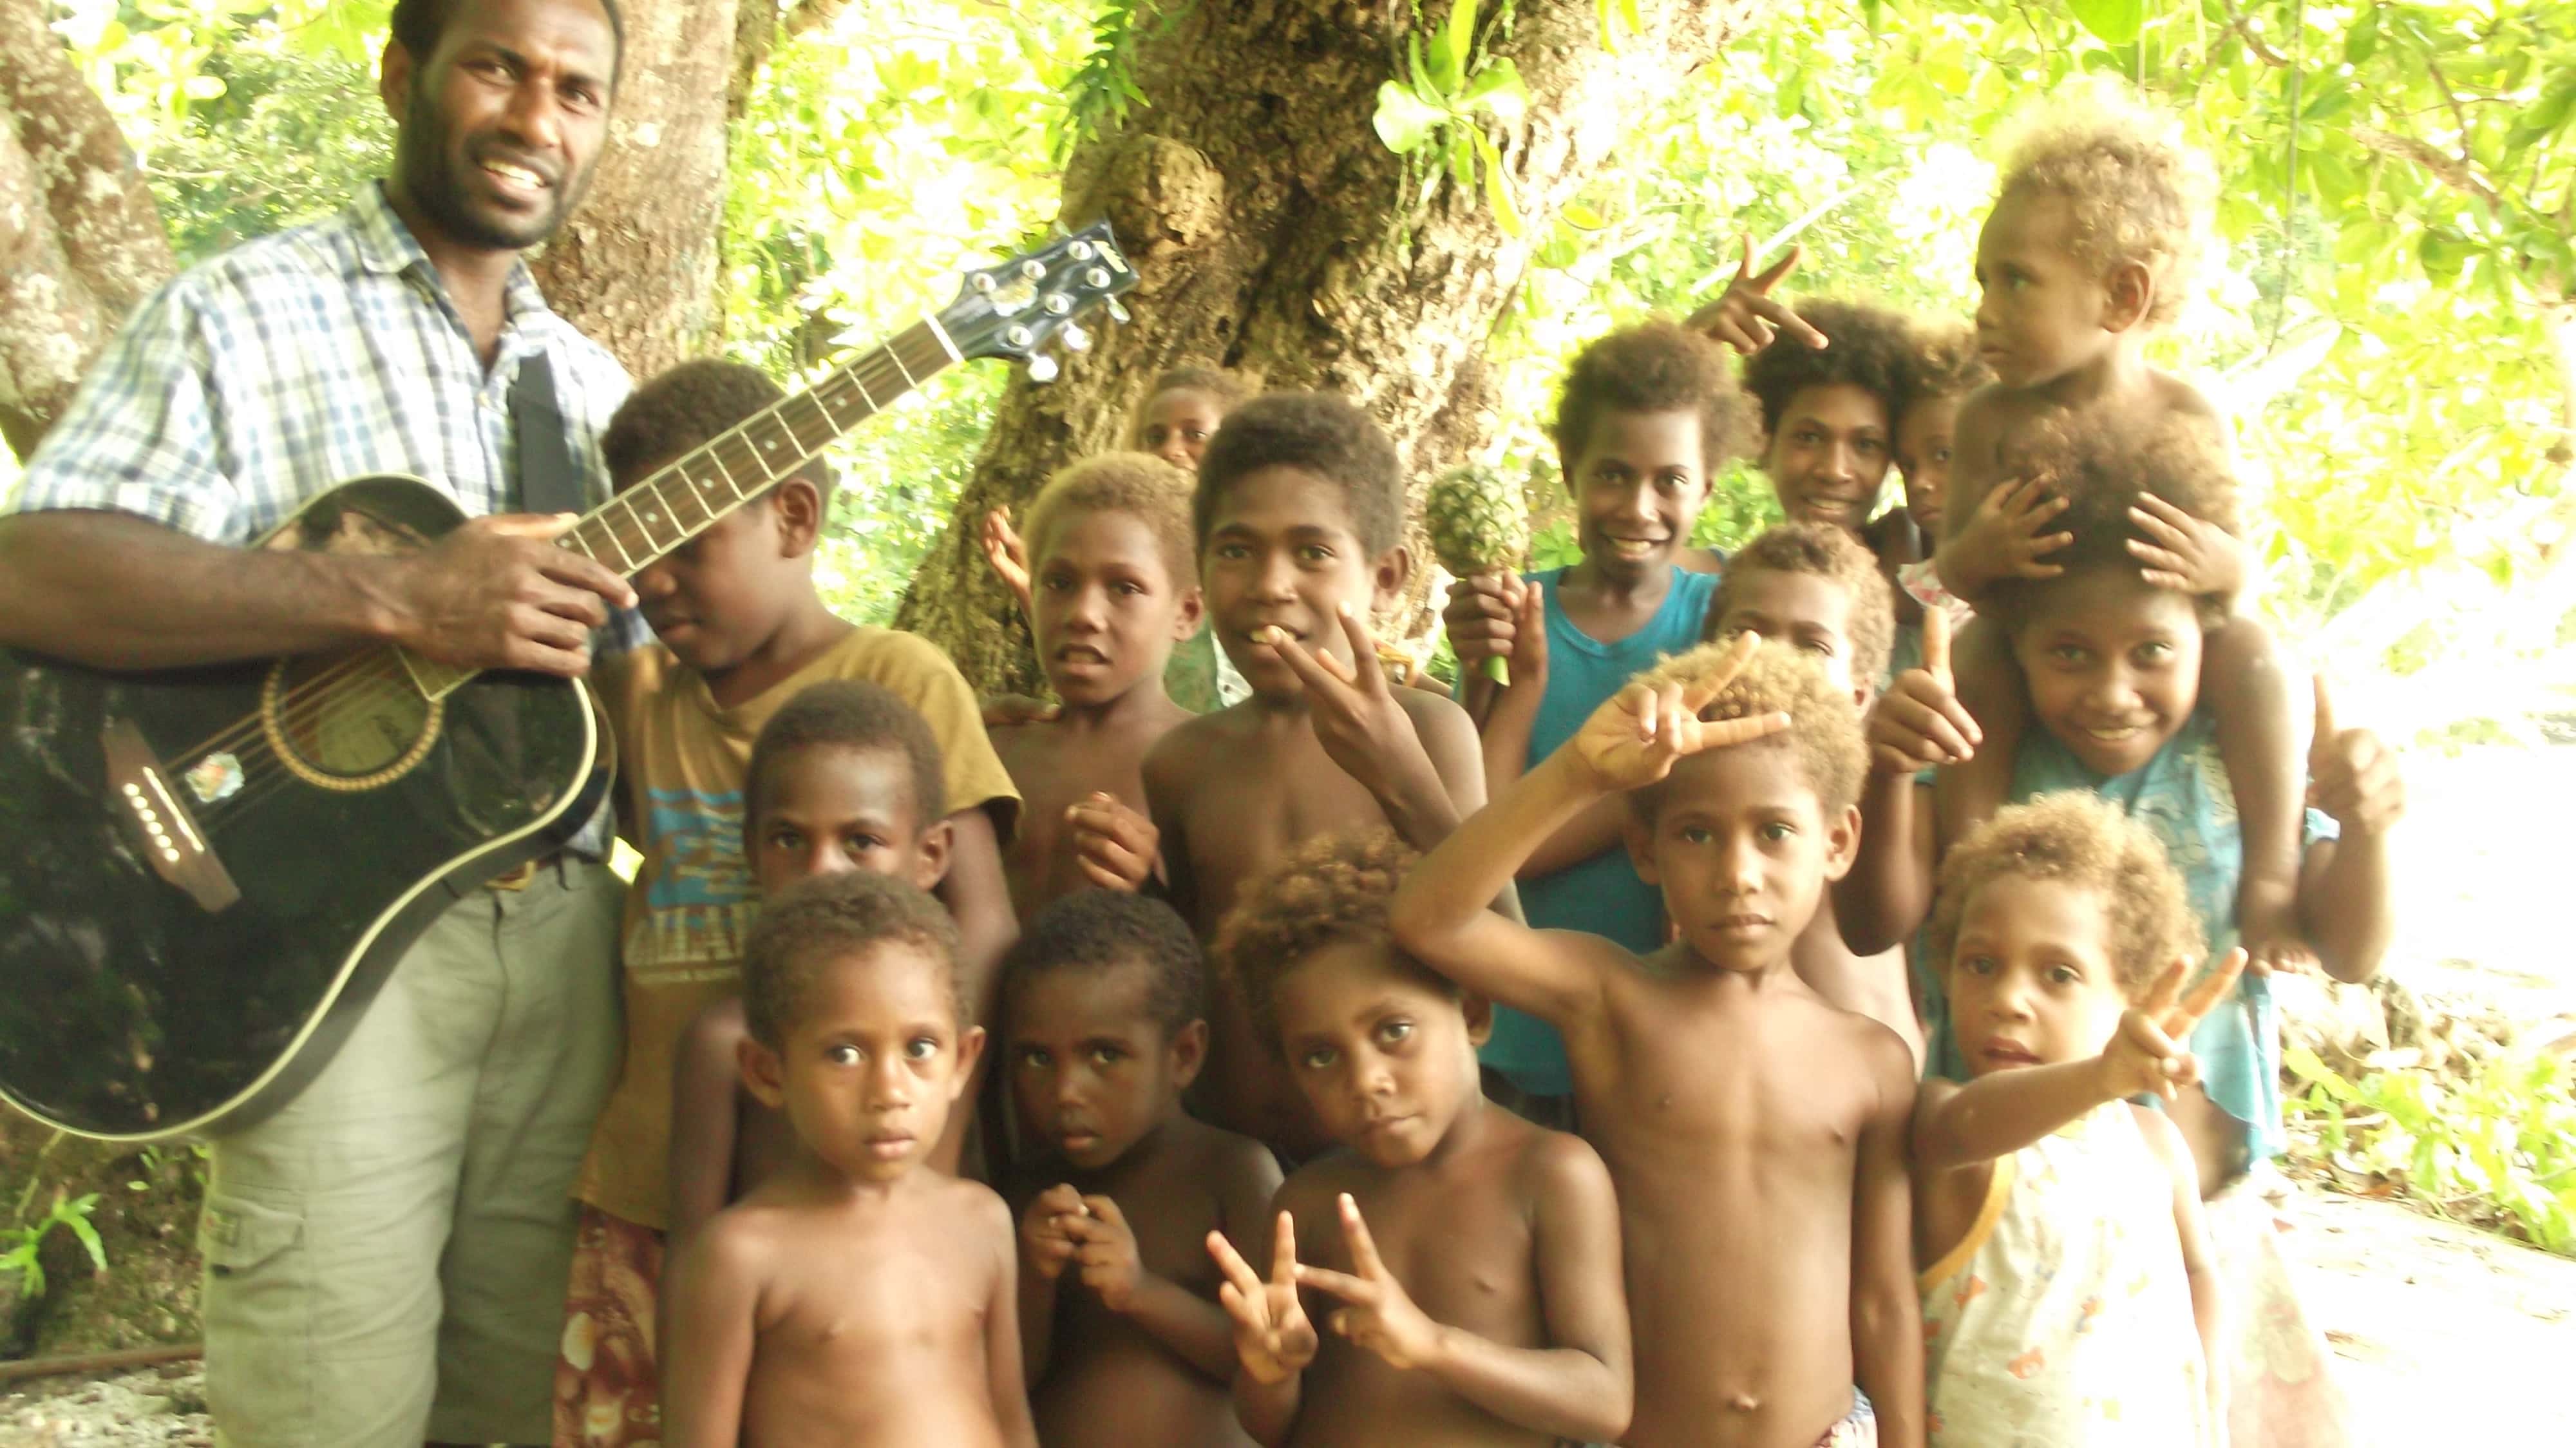 John Joseph, whose Helping Hands ministry works on the Torres islands, sings with village children. Photo: Adventist Record